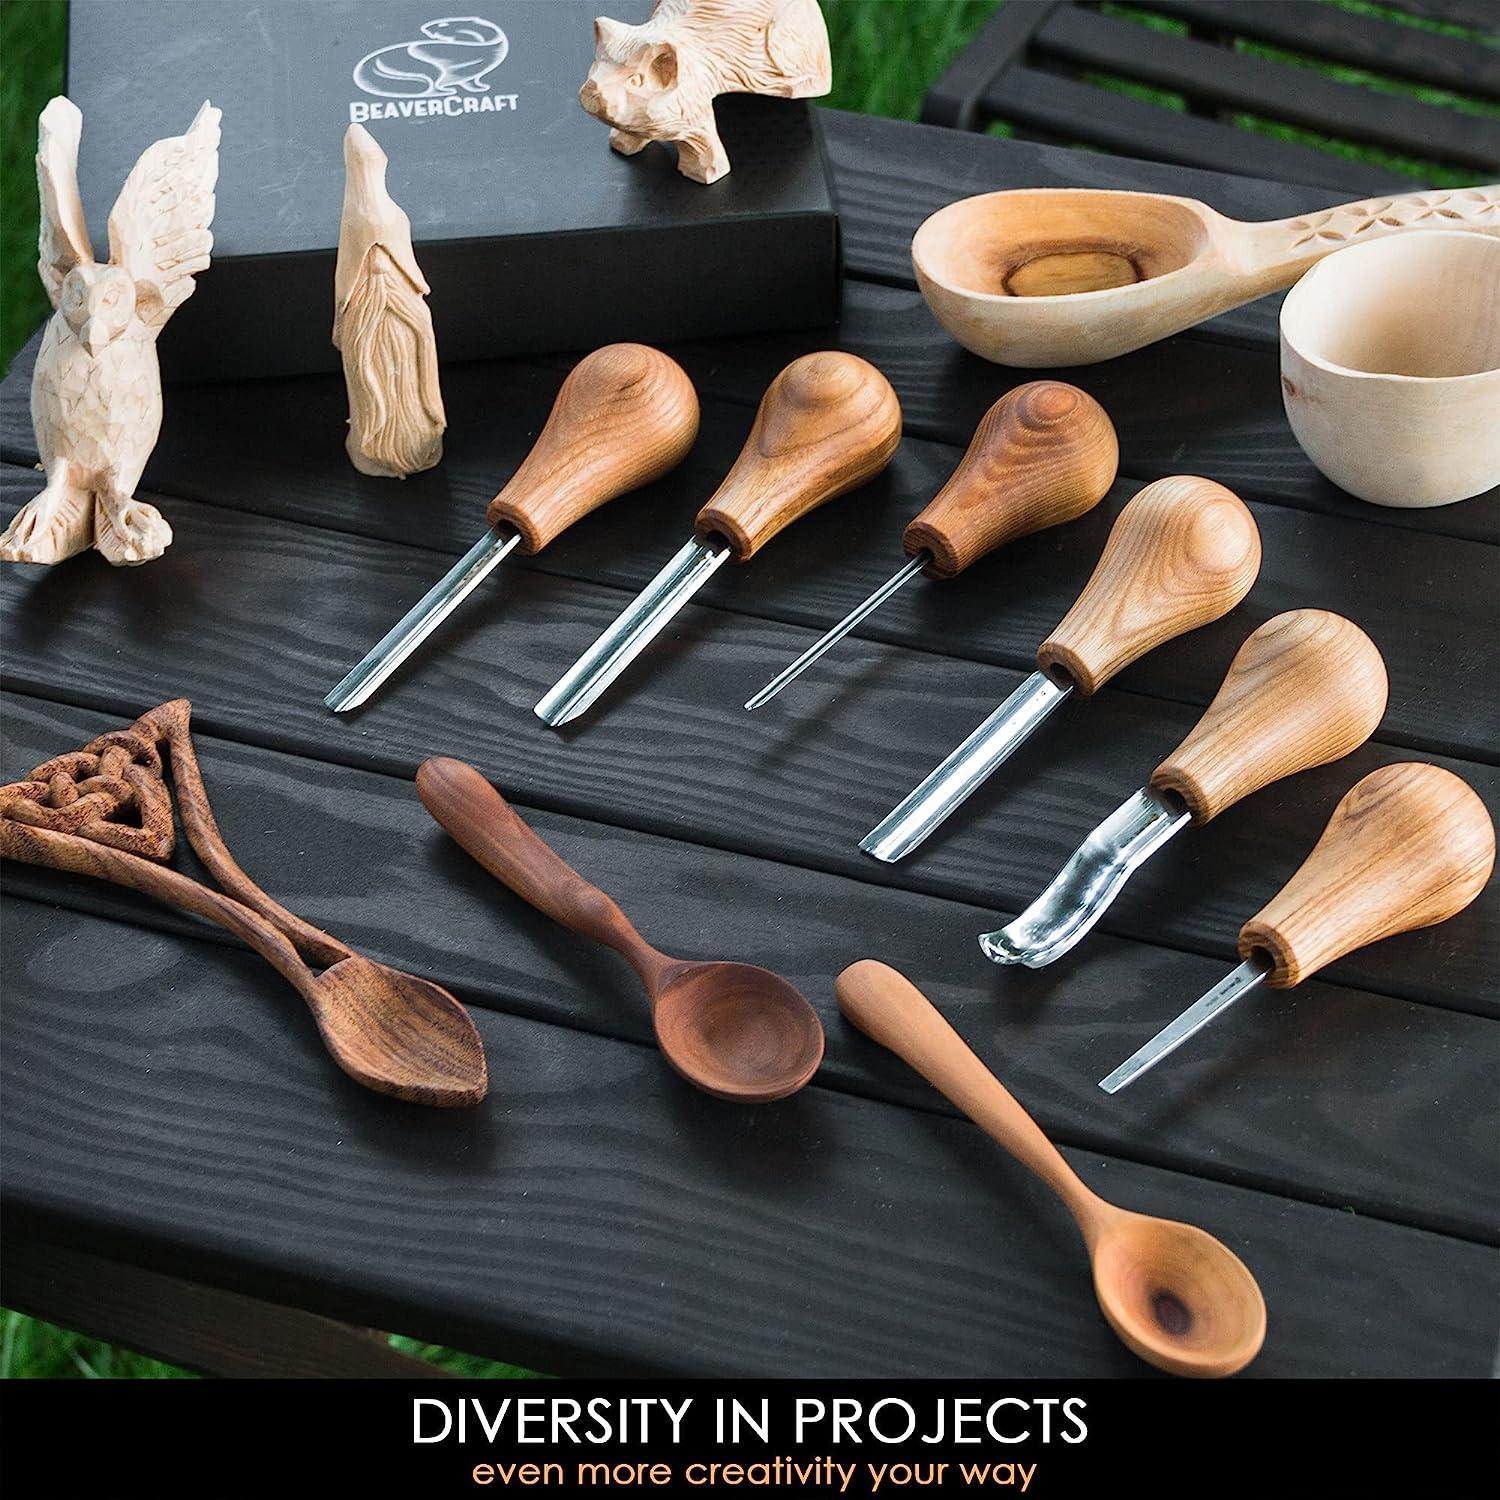 Beavercraft Spoon Carving Kit - My first attempts at Spoon Carving Tool  Review 